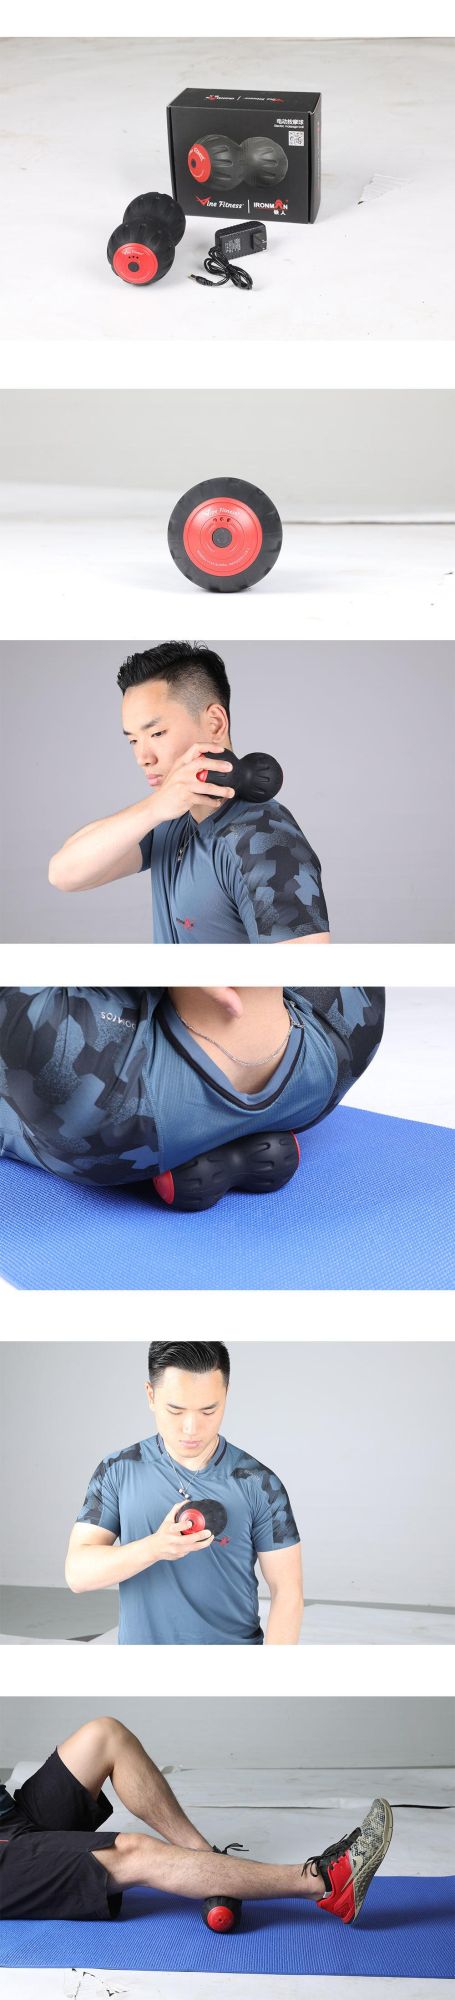 Electric Peanut Ball for Deep Tissue Massage Therapy